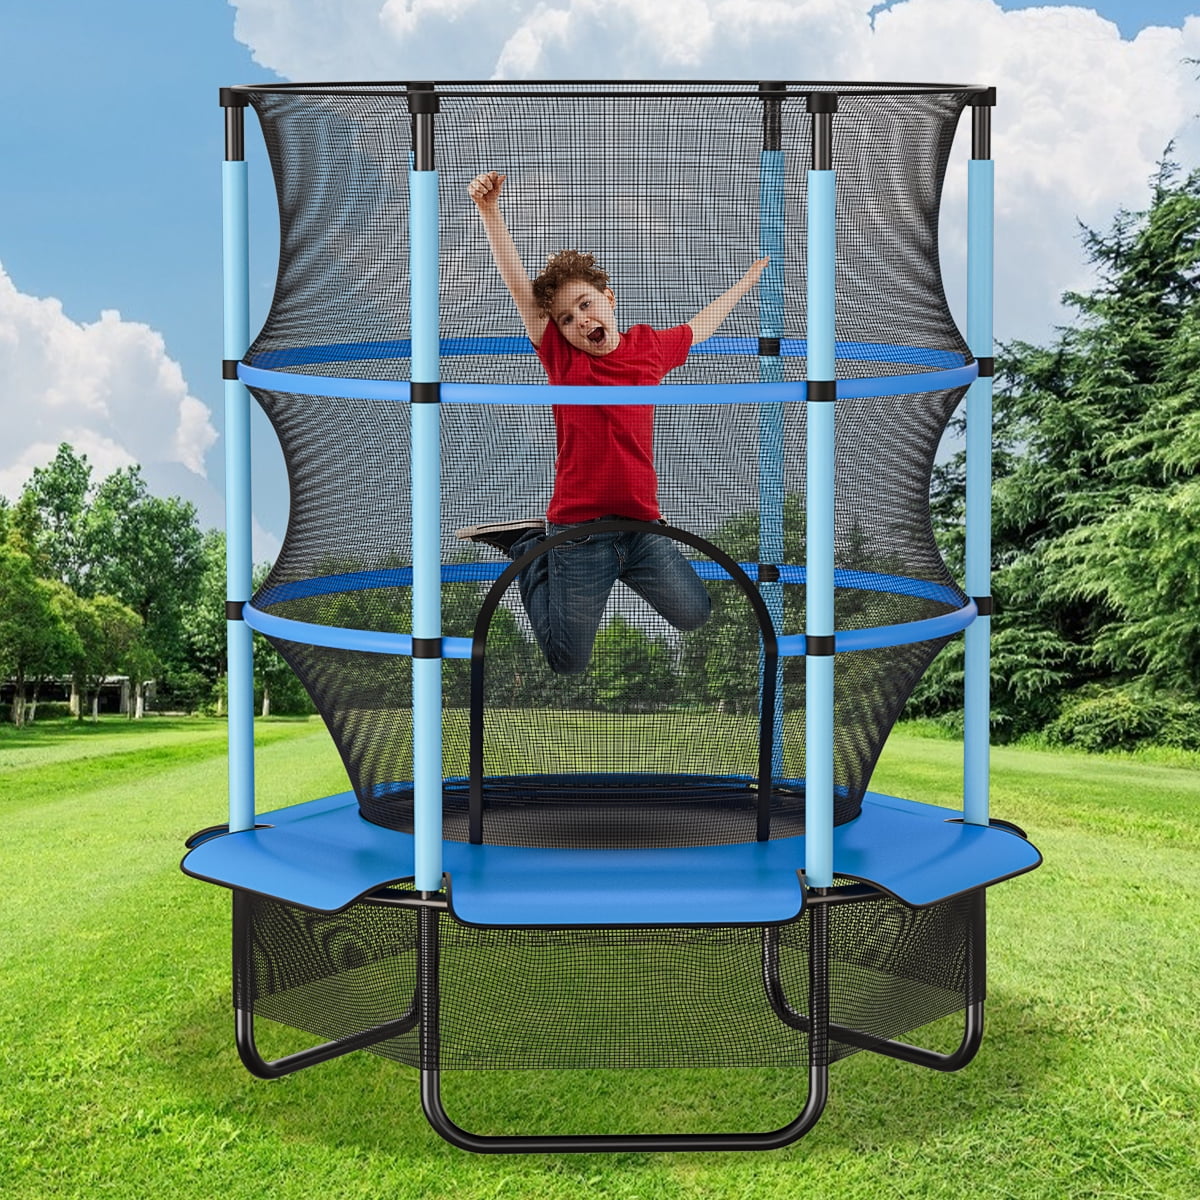 6ft Trampoline Youth Round Jumping Exercise Safety Pad Enclosure Combo Kids Gift 